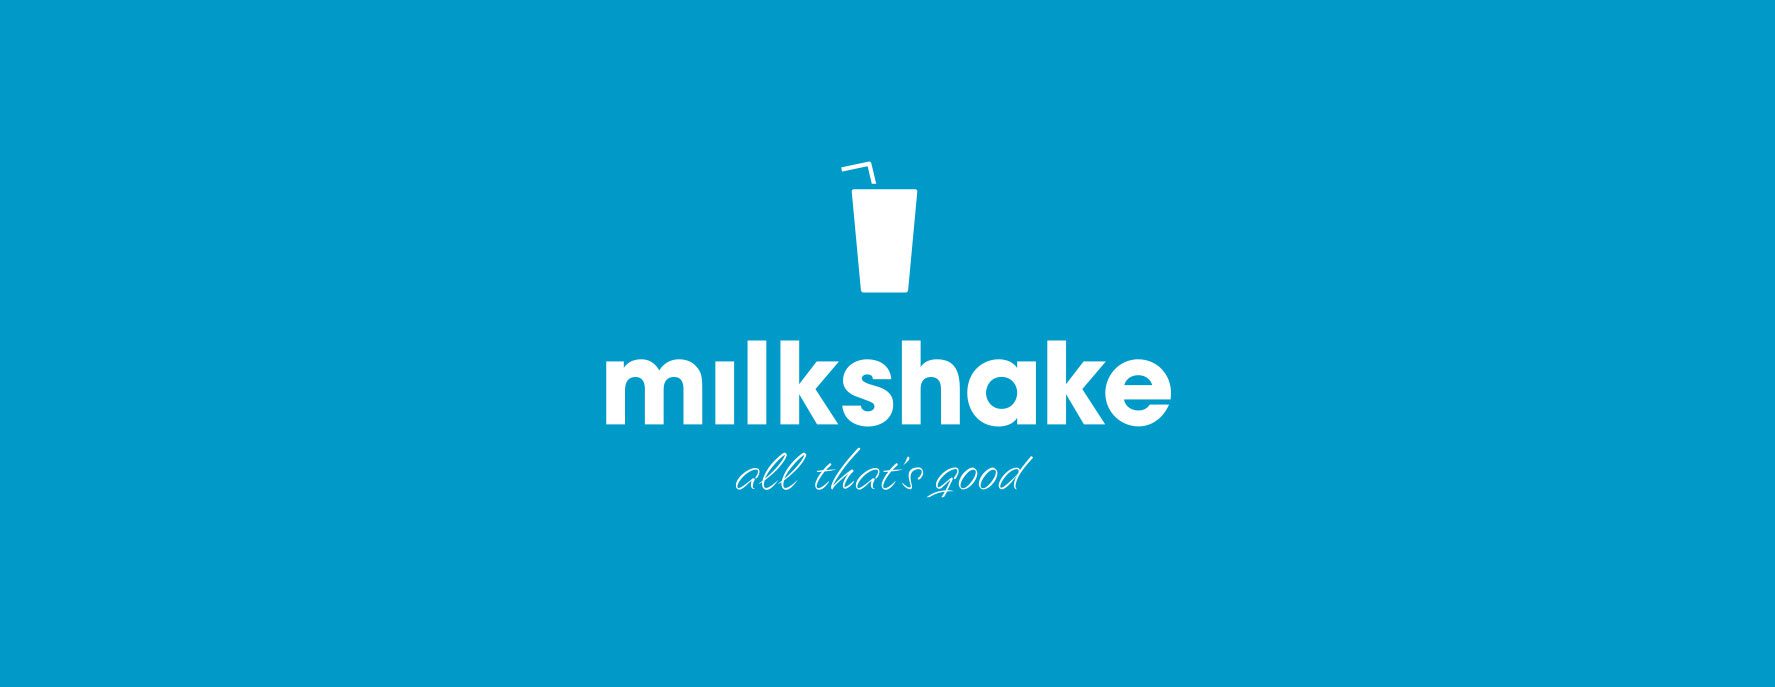 A blue background with the word milkshake written in white.